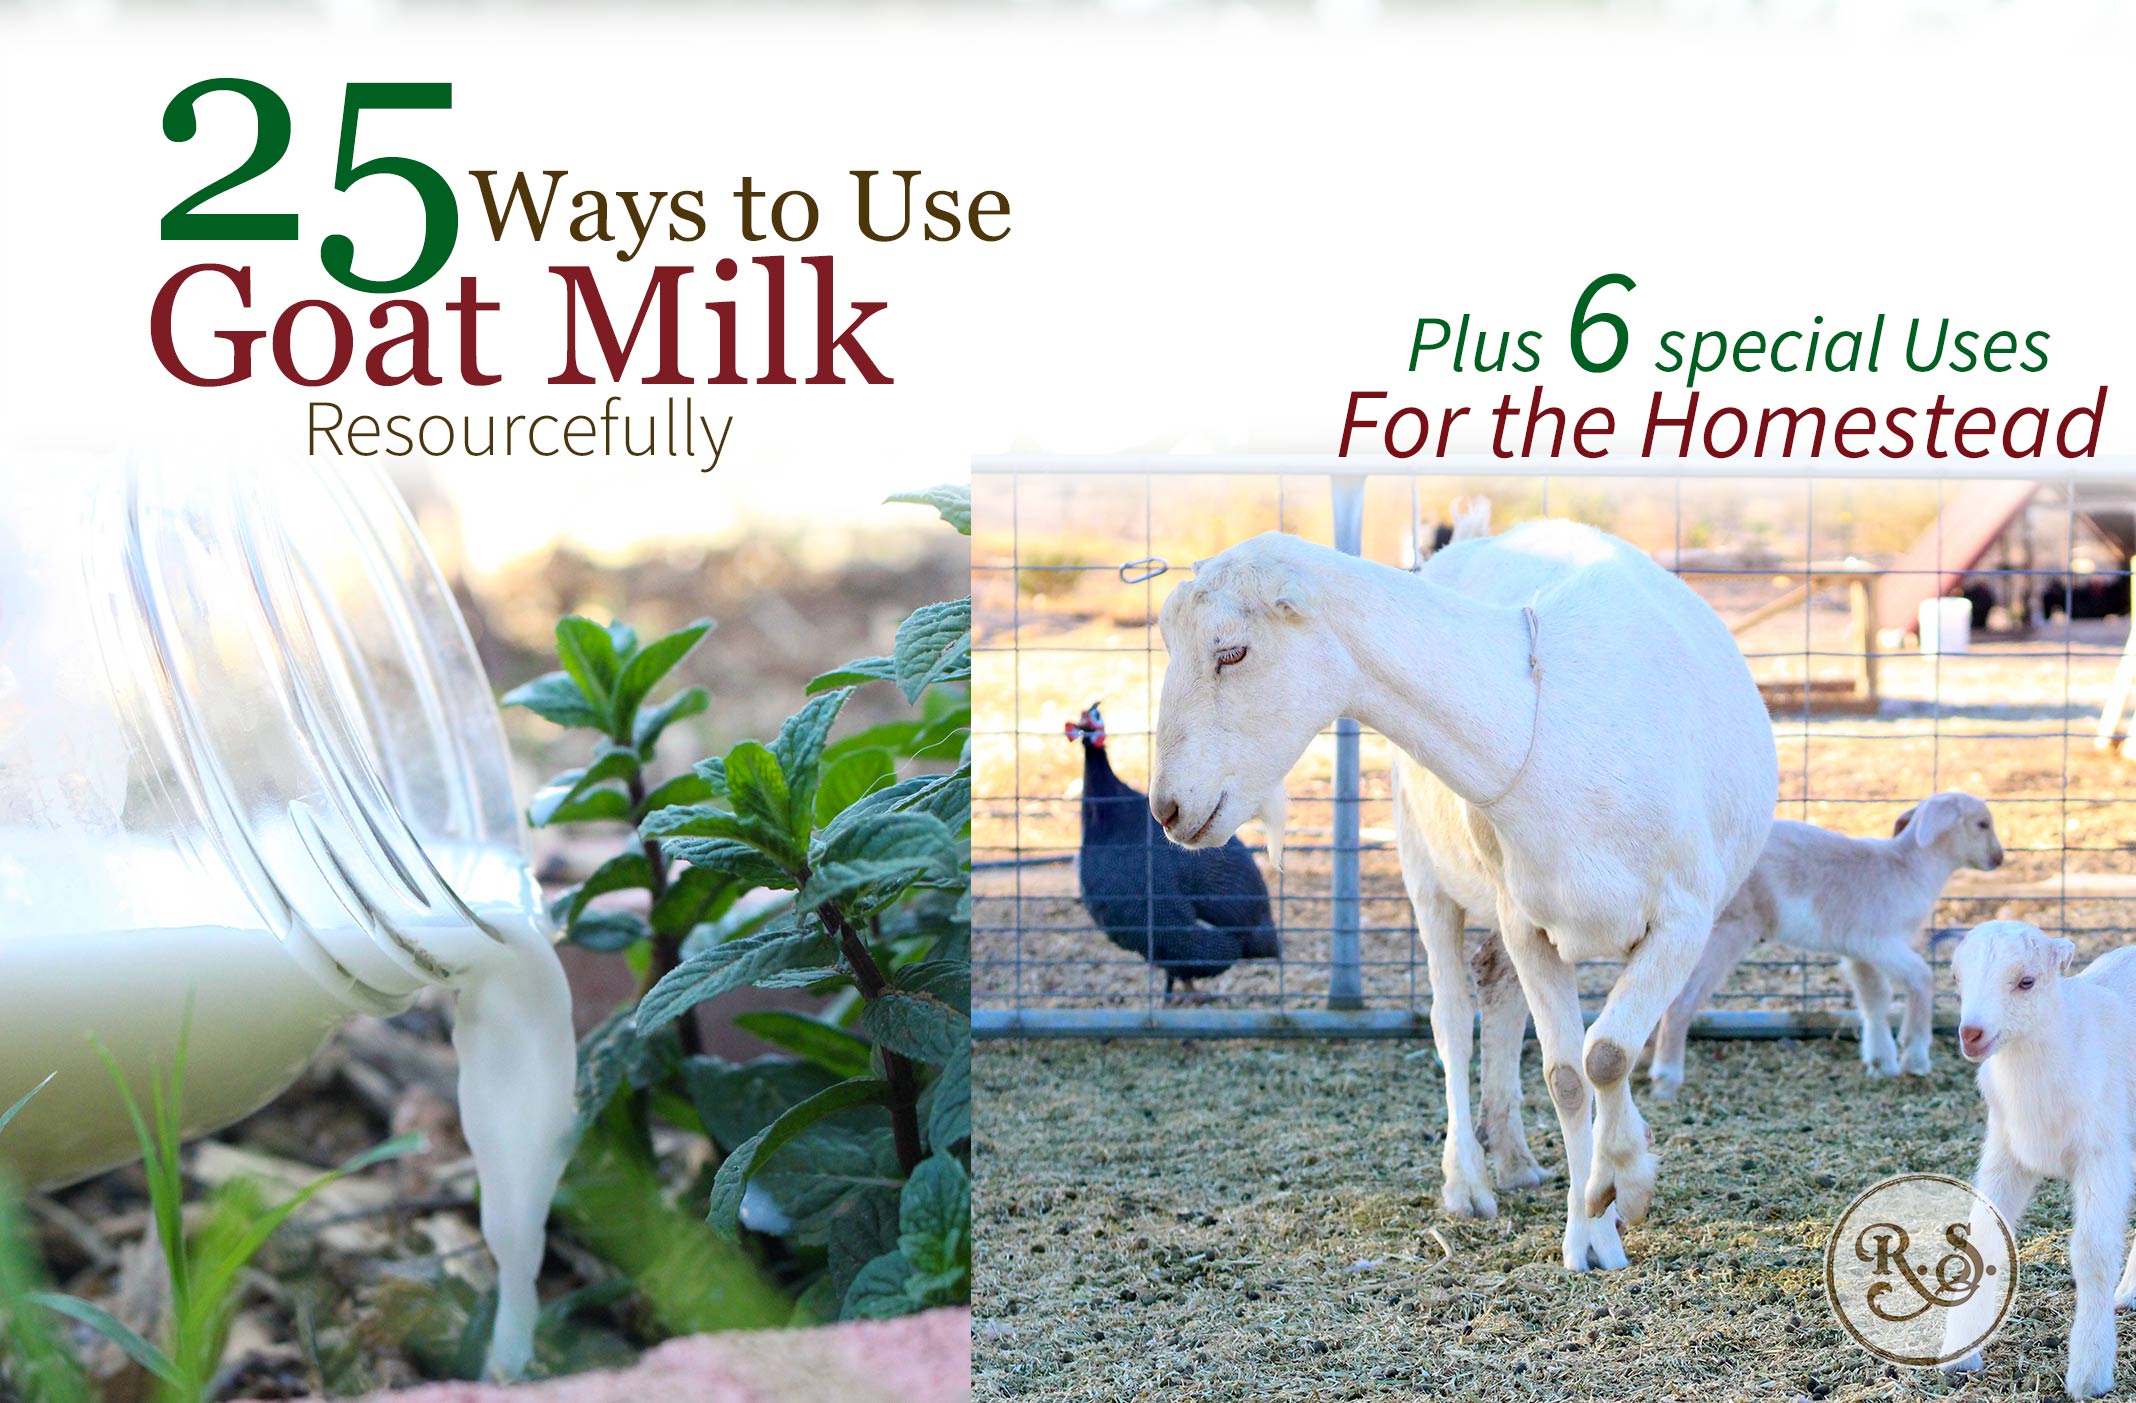 Dairy goat milk is a wonderful resource on the homestead. Once you start milking goats you’ll have times when you have way more milk than your family can drink!